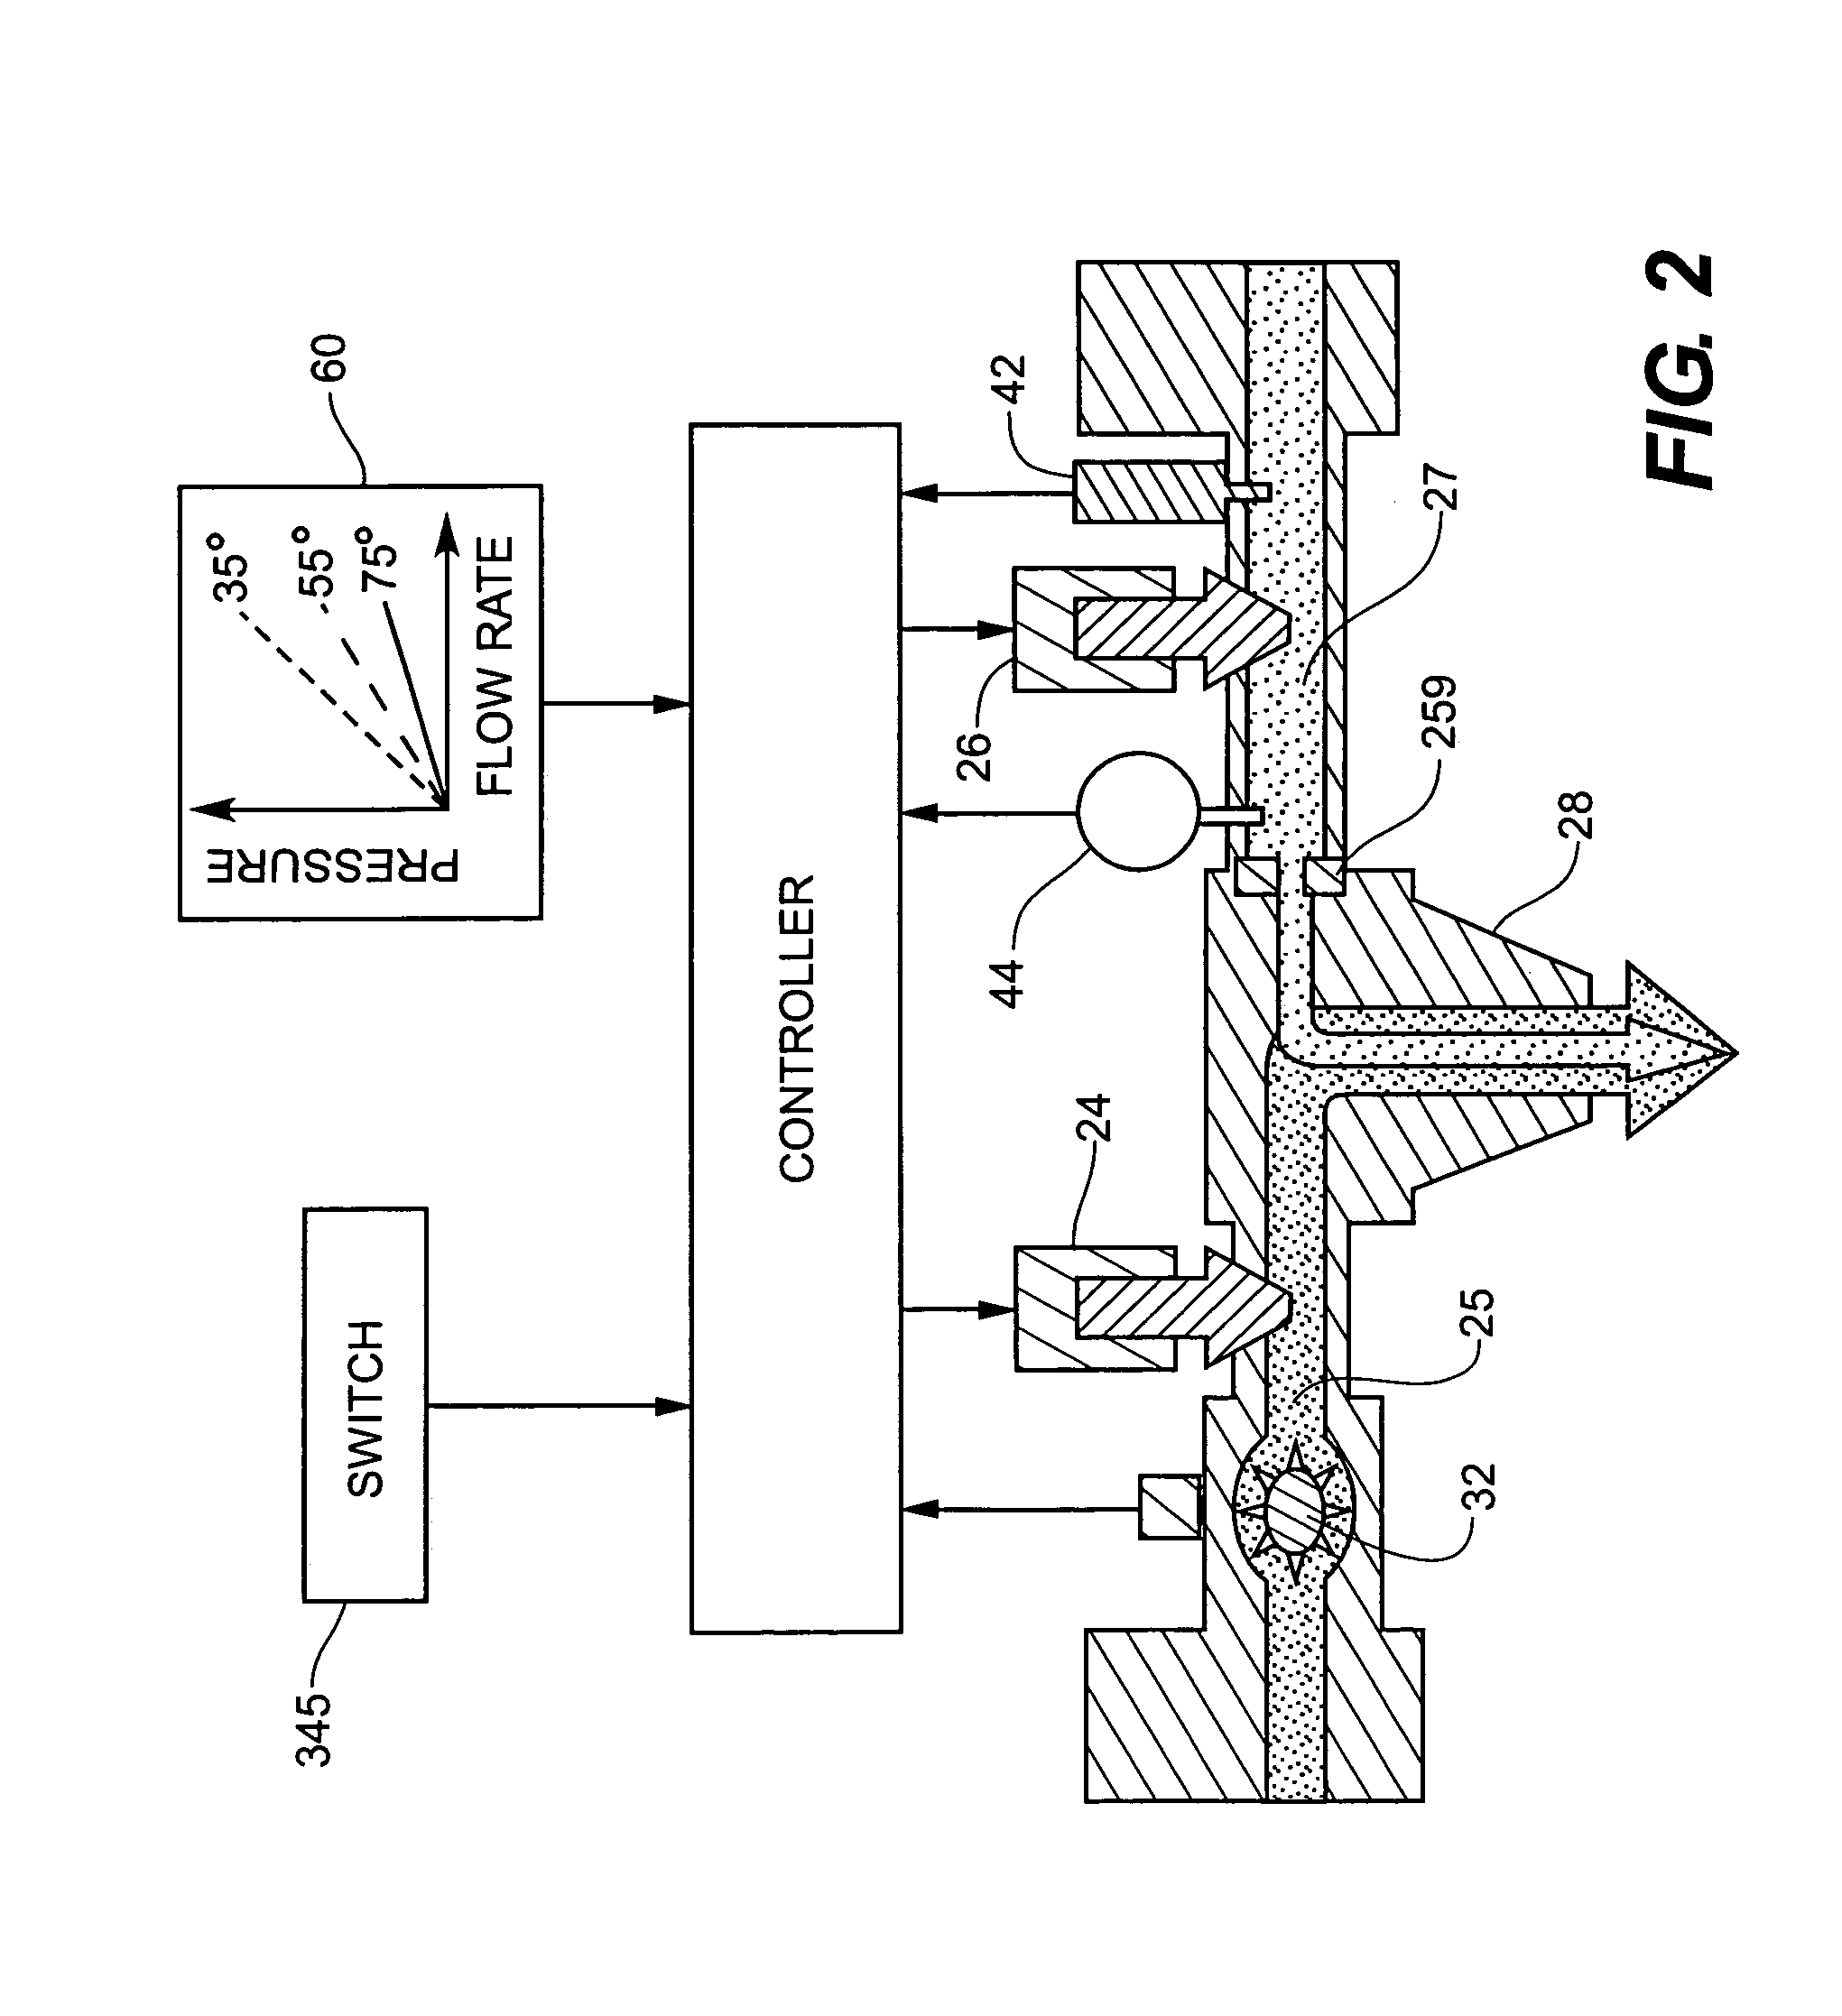 Beverage forming and dispensing system